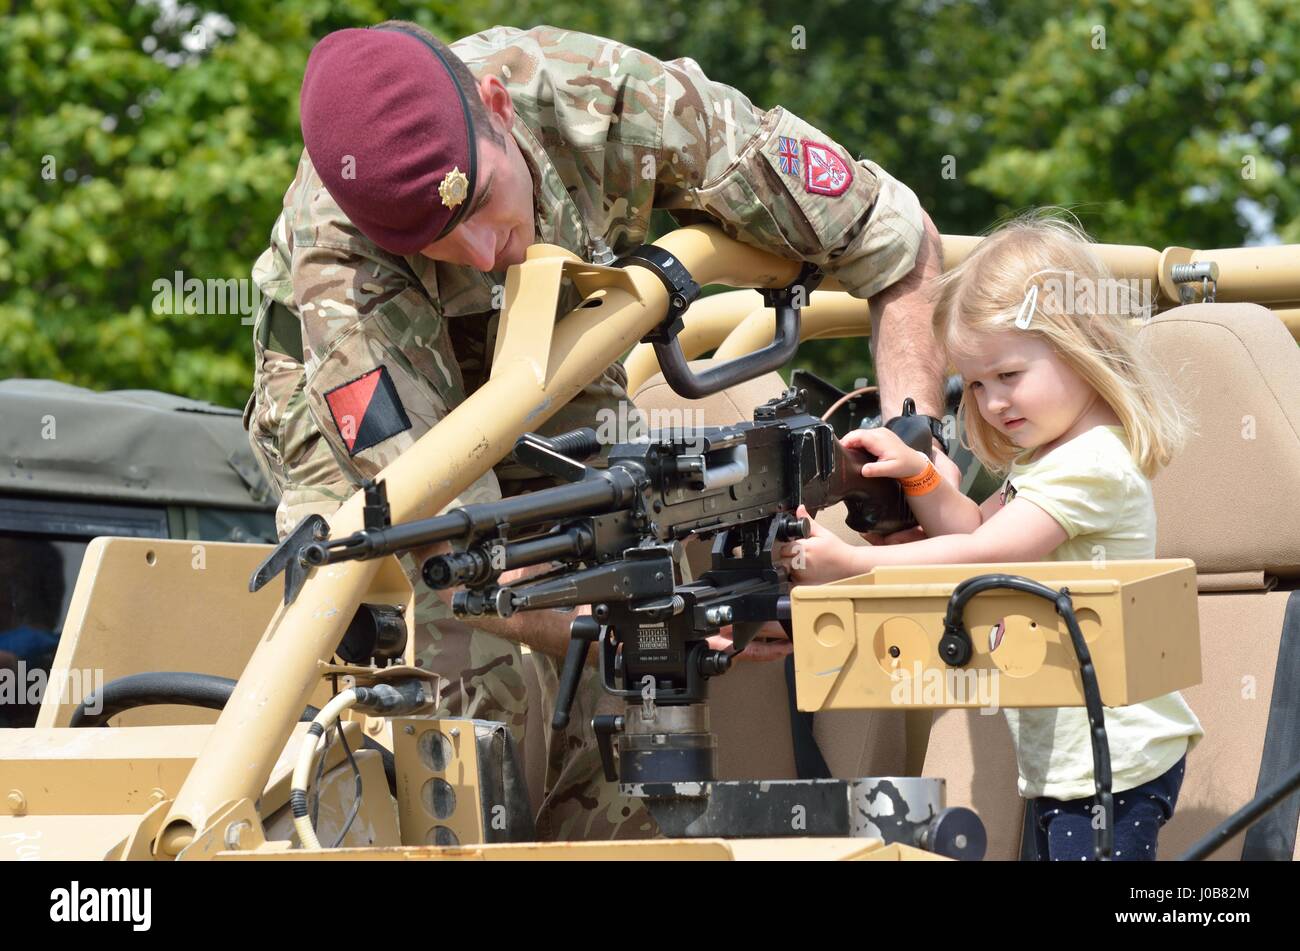 Military Tattoo  COLCHESTER ESSEX UK 8 July 2014:   Small Girl being shown machine gun by soldier Stock Photo